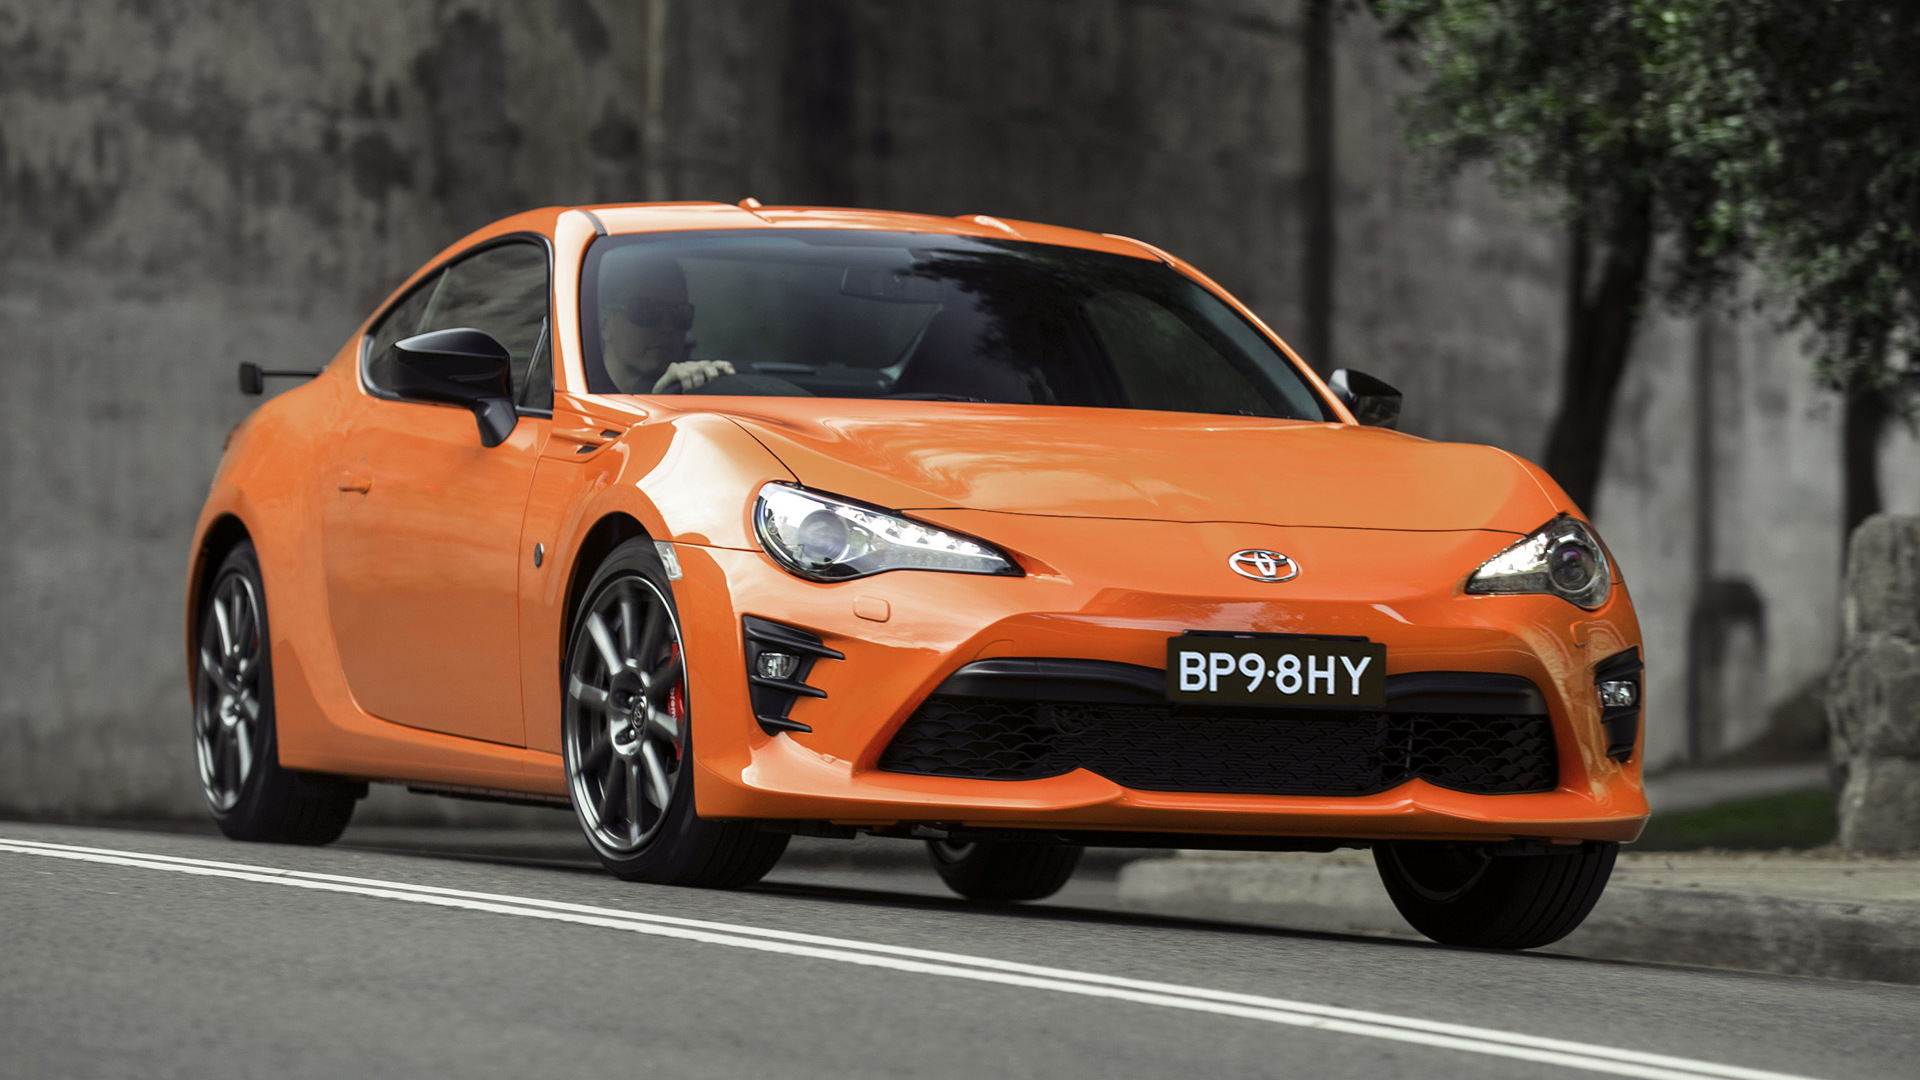 2017 Toyota 86 limited-edition model for Australia